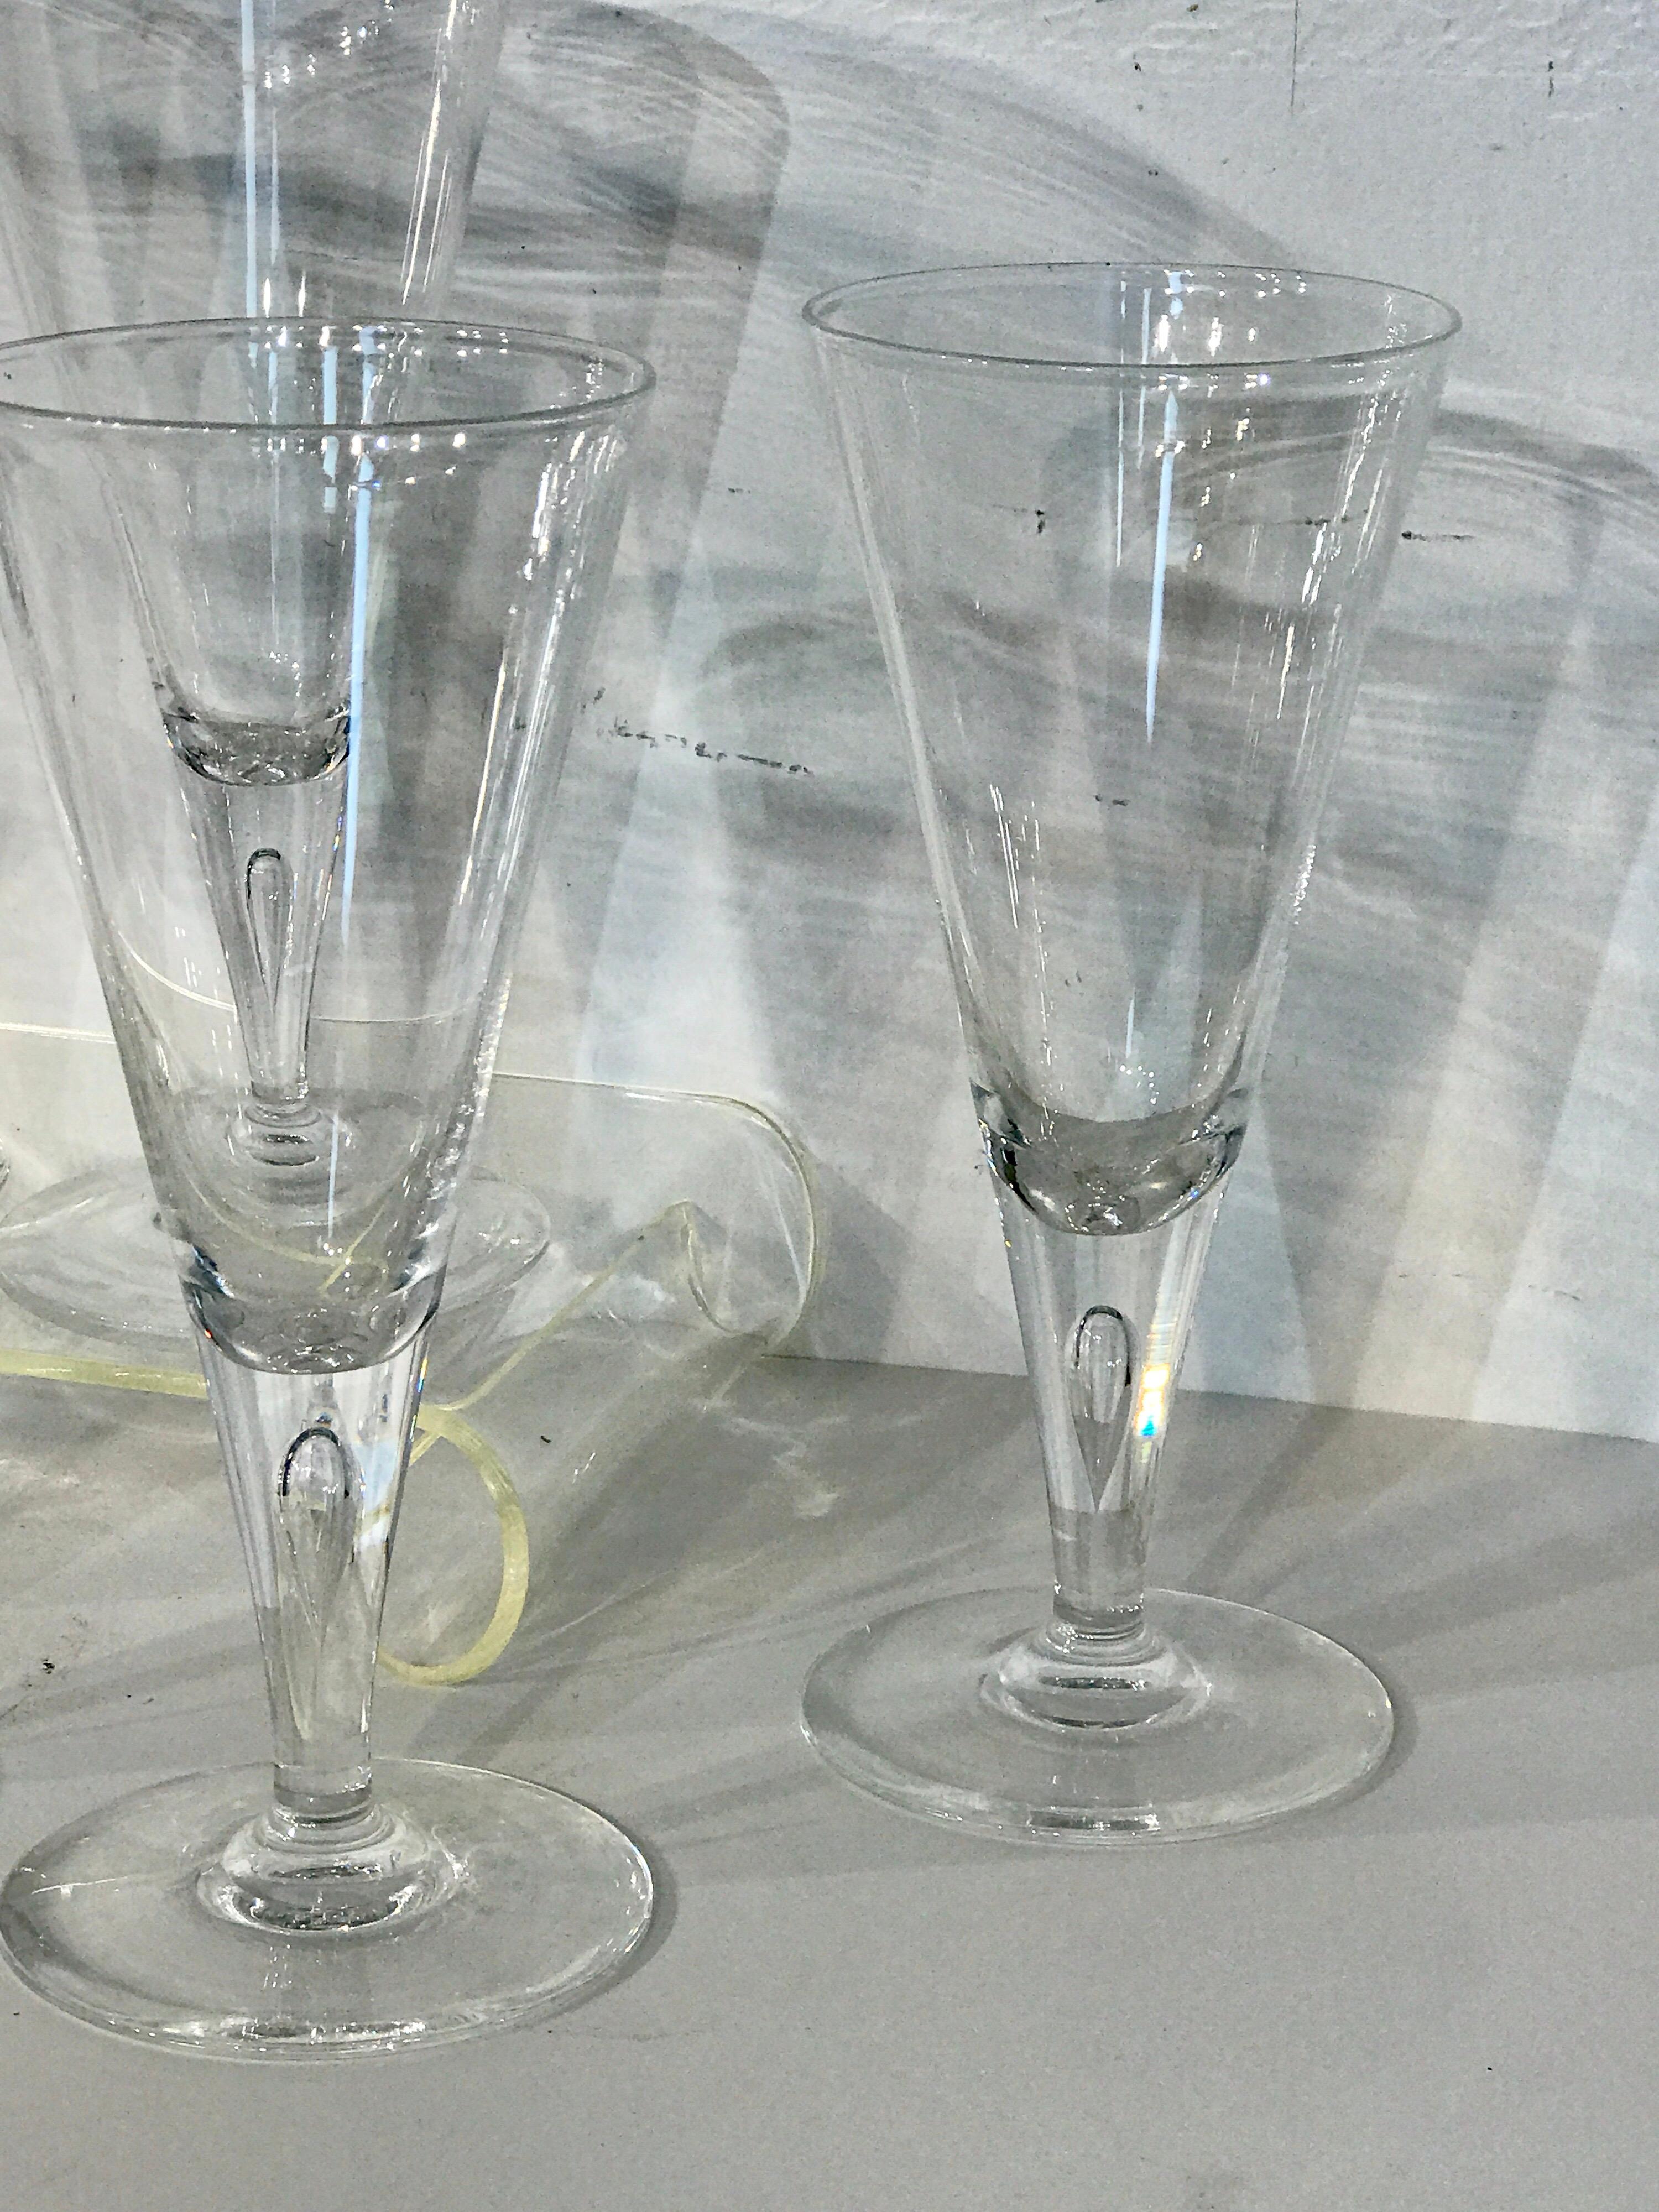 Seven tall midcentury Steuben teardrop water or wine glasses #7924
Shape # 7924 by Steuben
Description: Fluted shape, bubble in stem
Excellent well cared for vintage condition, clear and crisp crystal
Signed with script 